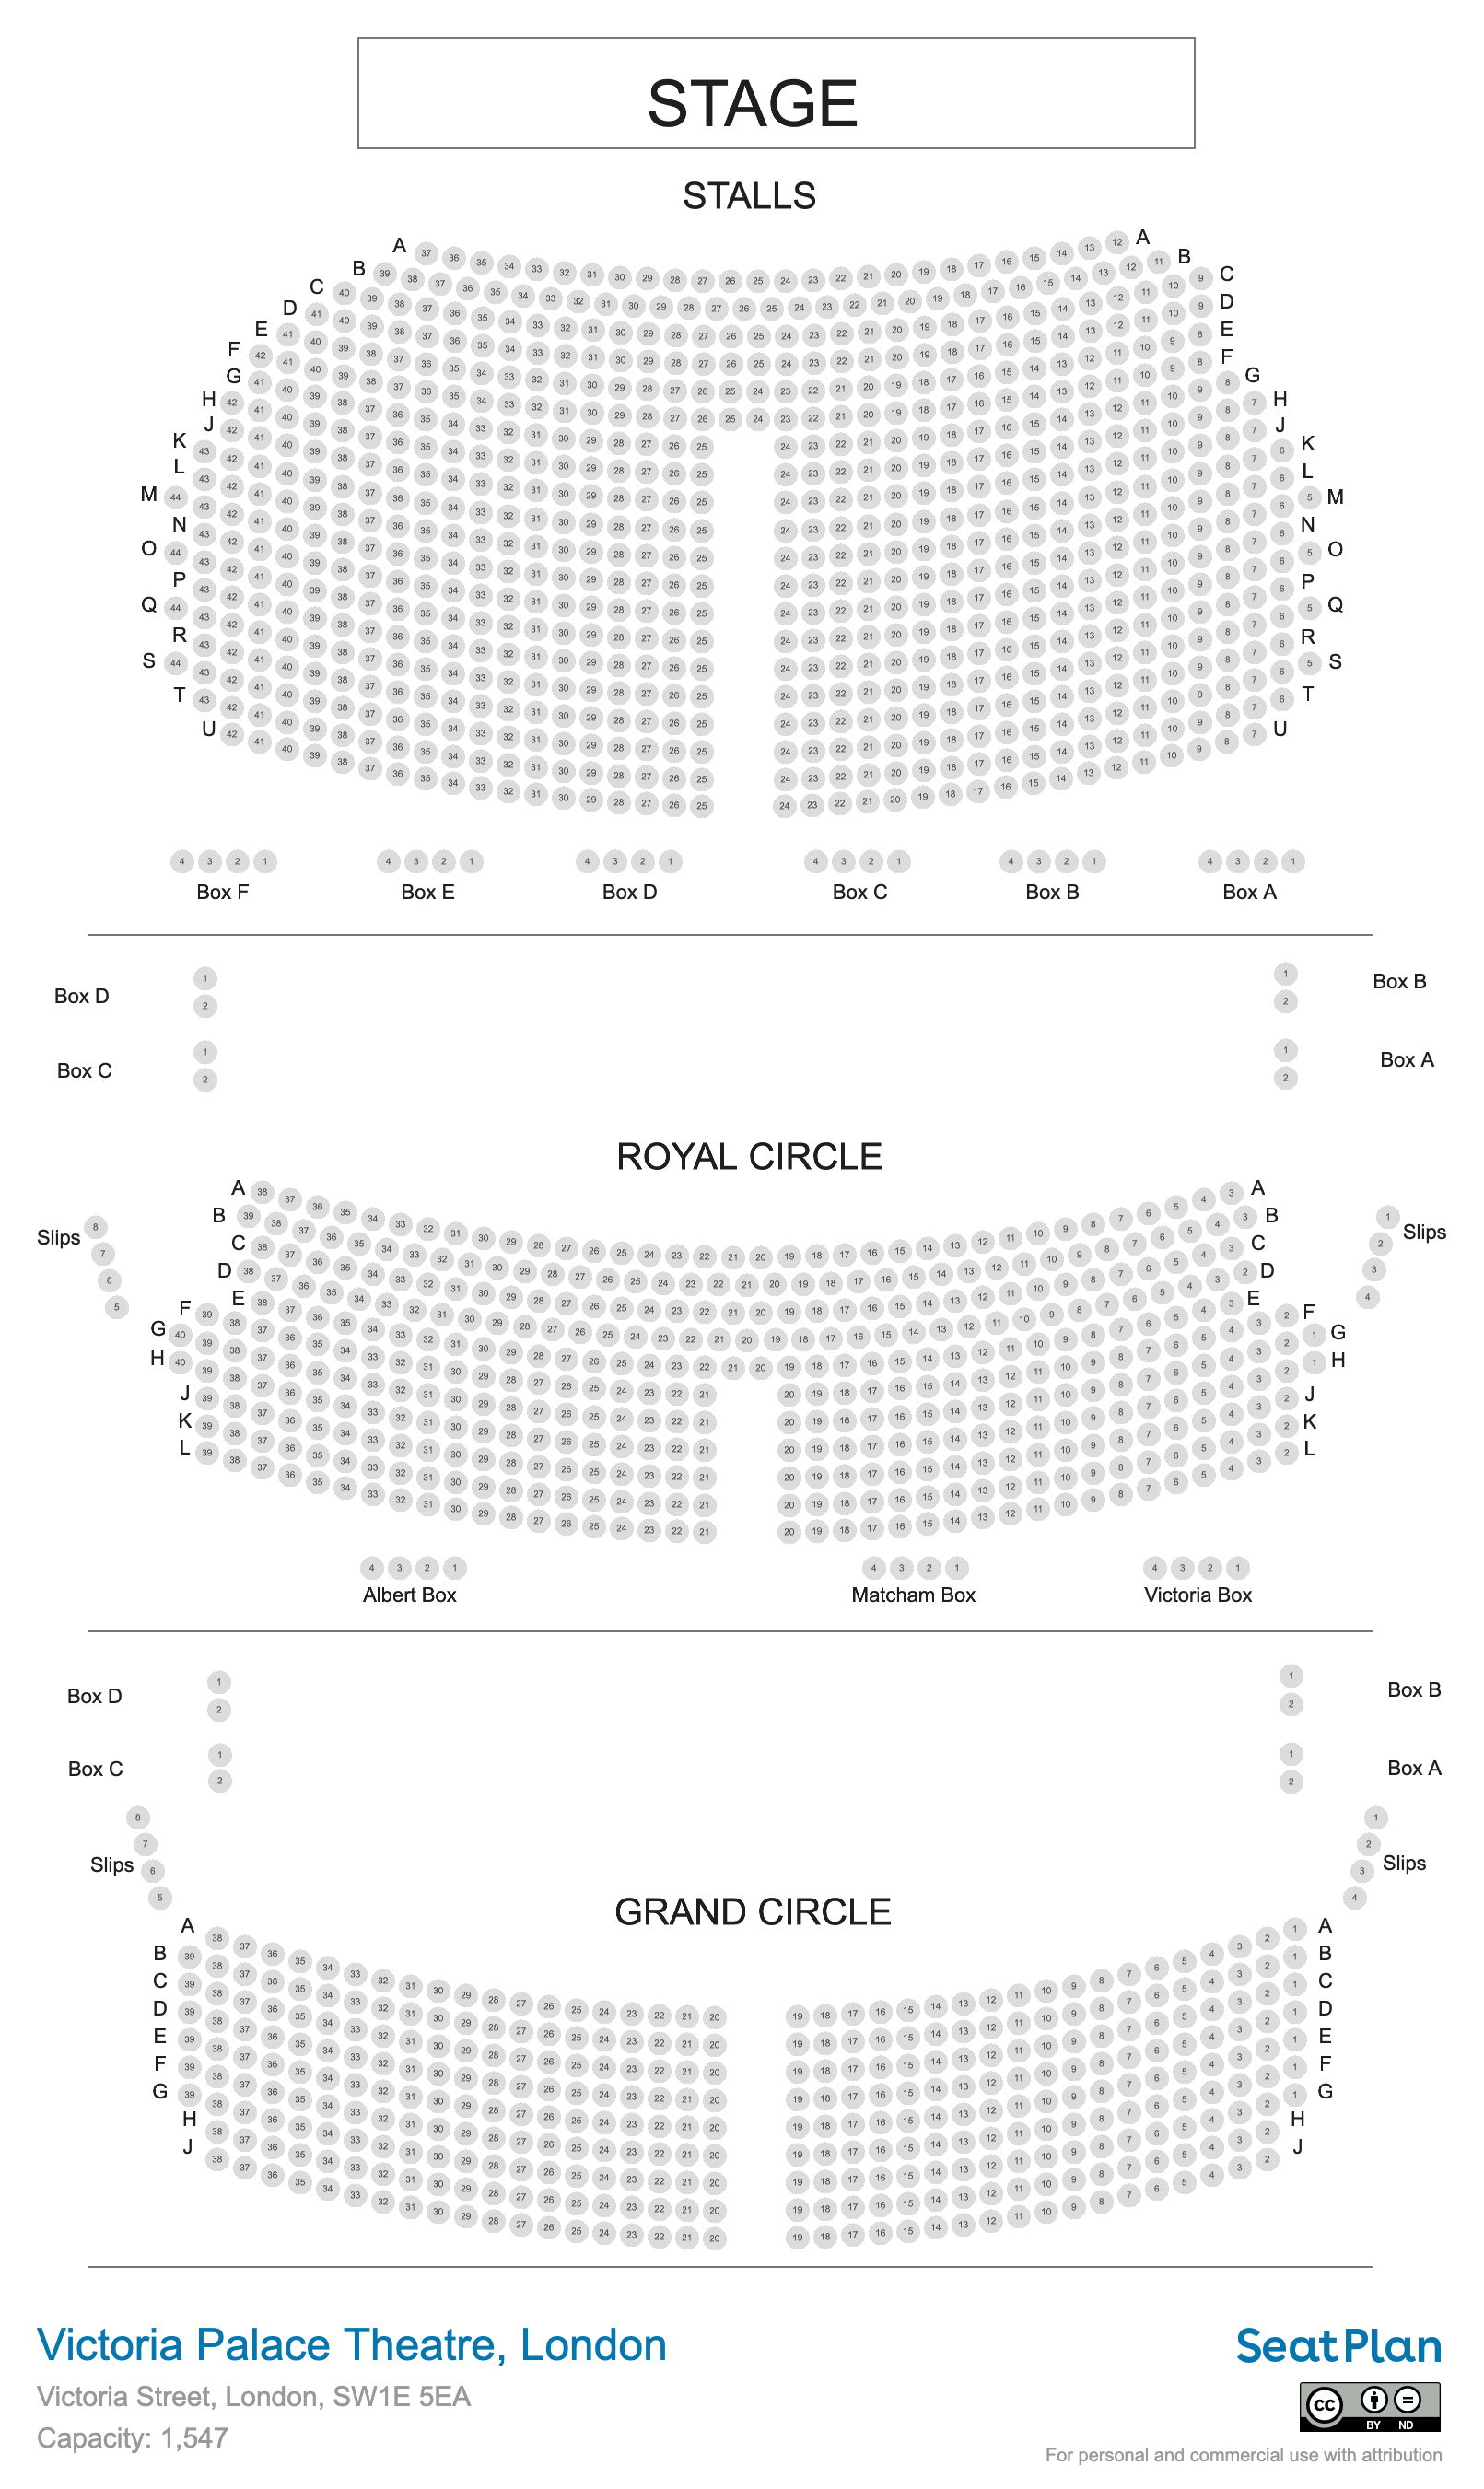 Victoria Palace Theatre seating plan